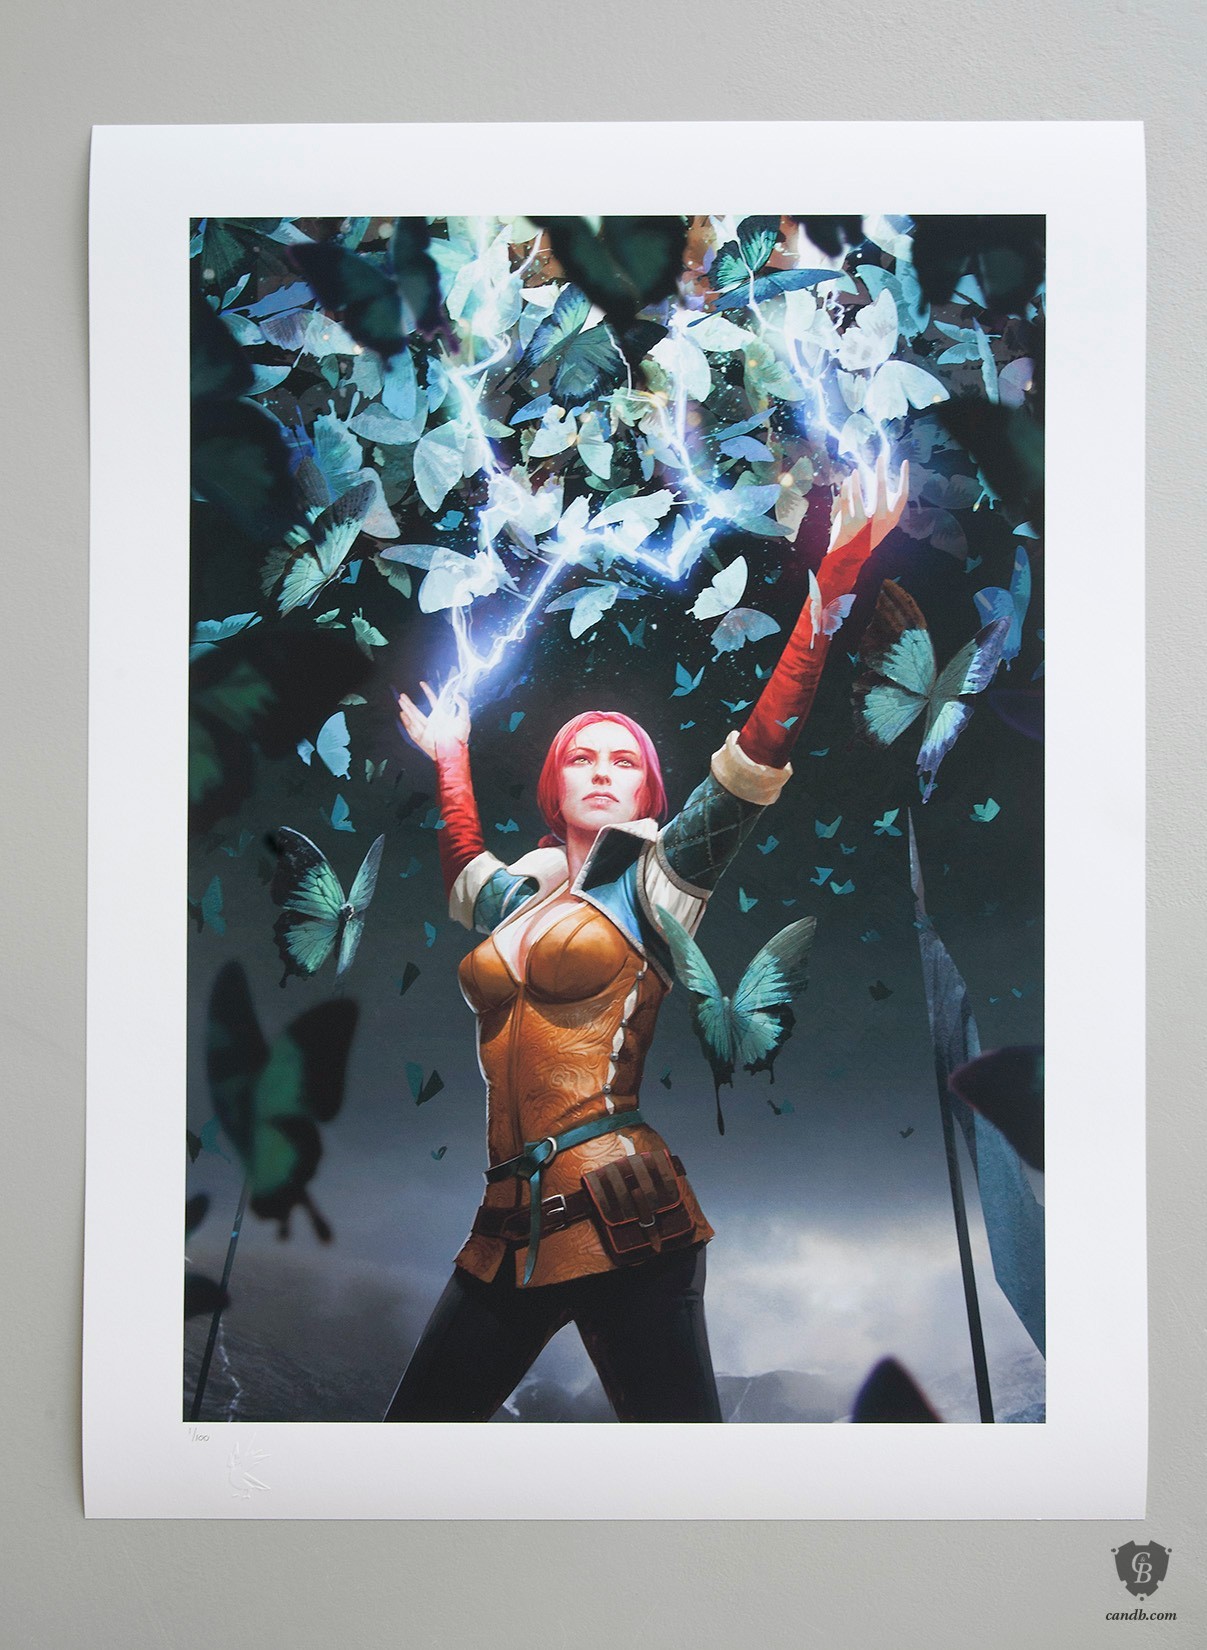 triss-the-witcher_cd-projekt-red_1207x1650_marked.jpg